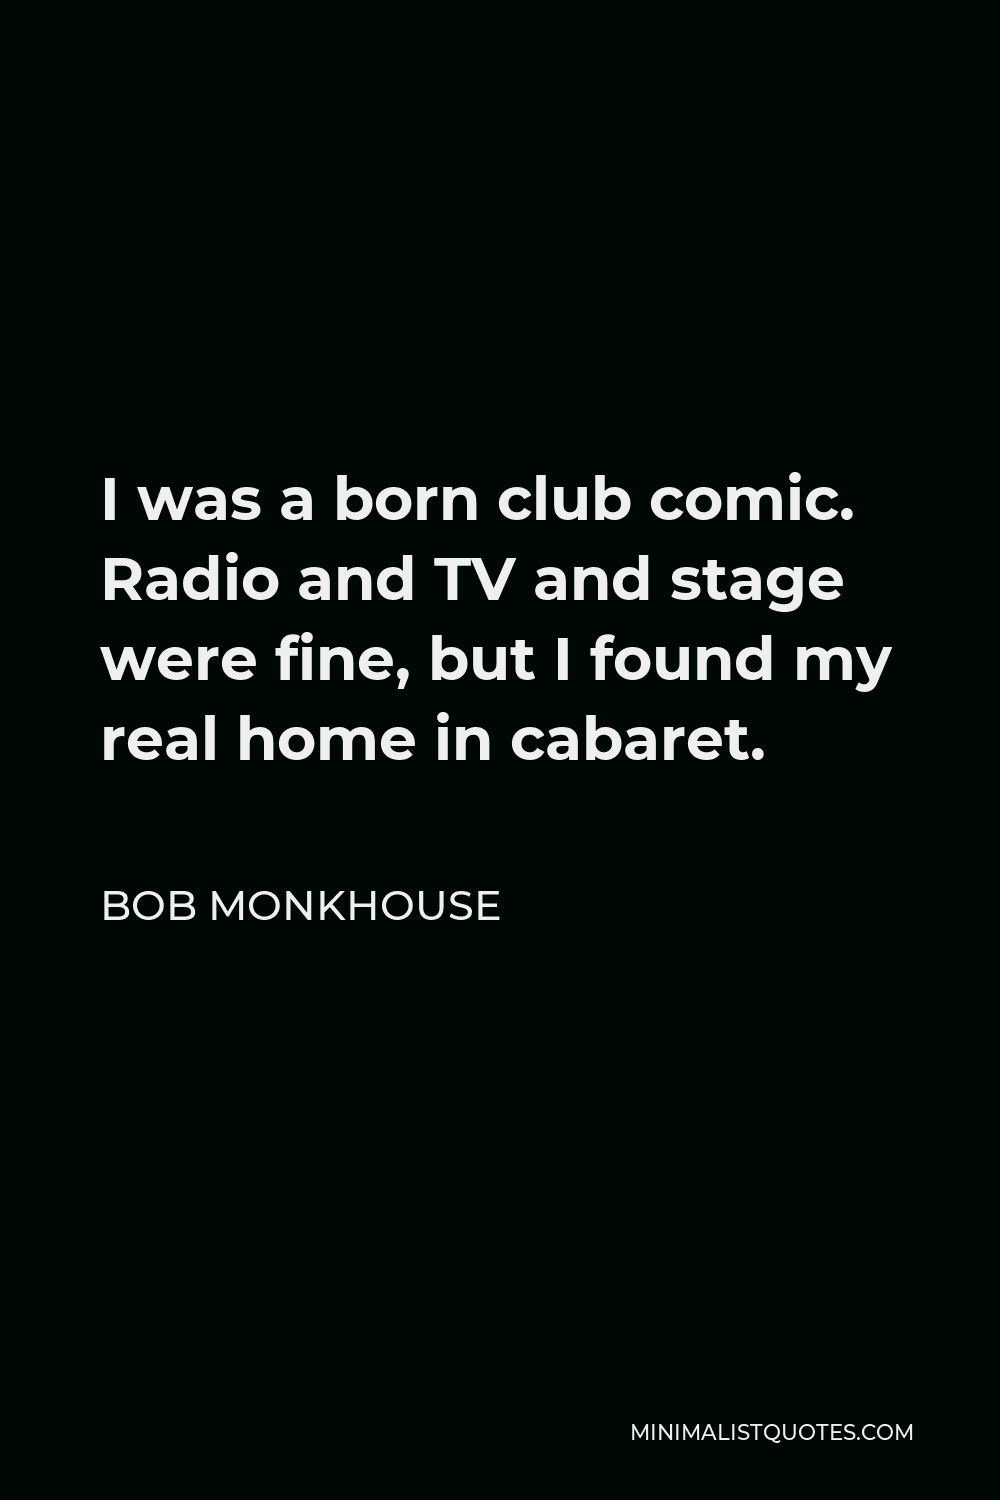 Bob Monkhouse Quote - I was a born club comic. Radio and TV and stage were fine, but I found my real home in cabaret.